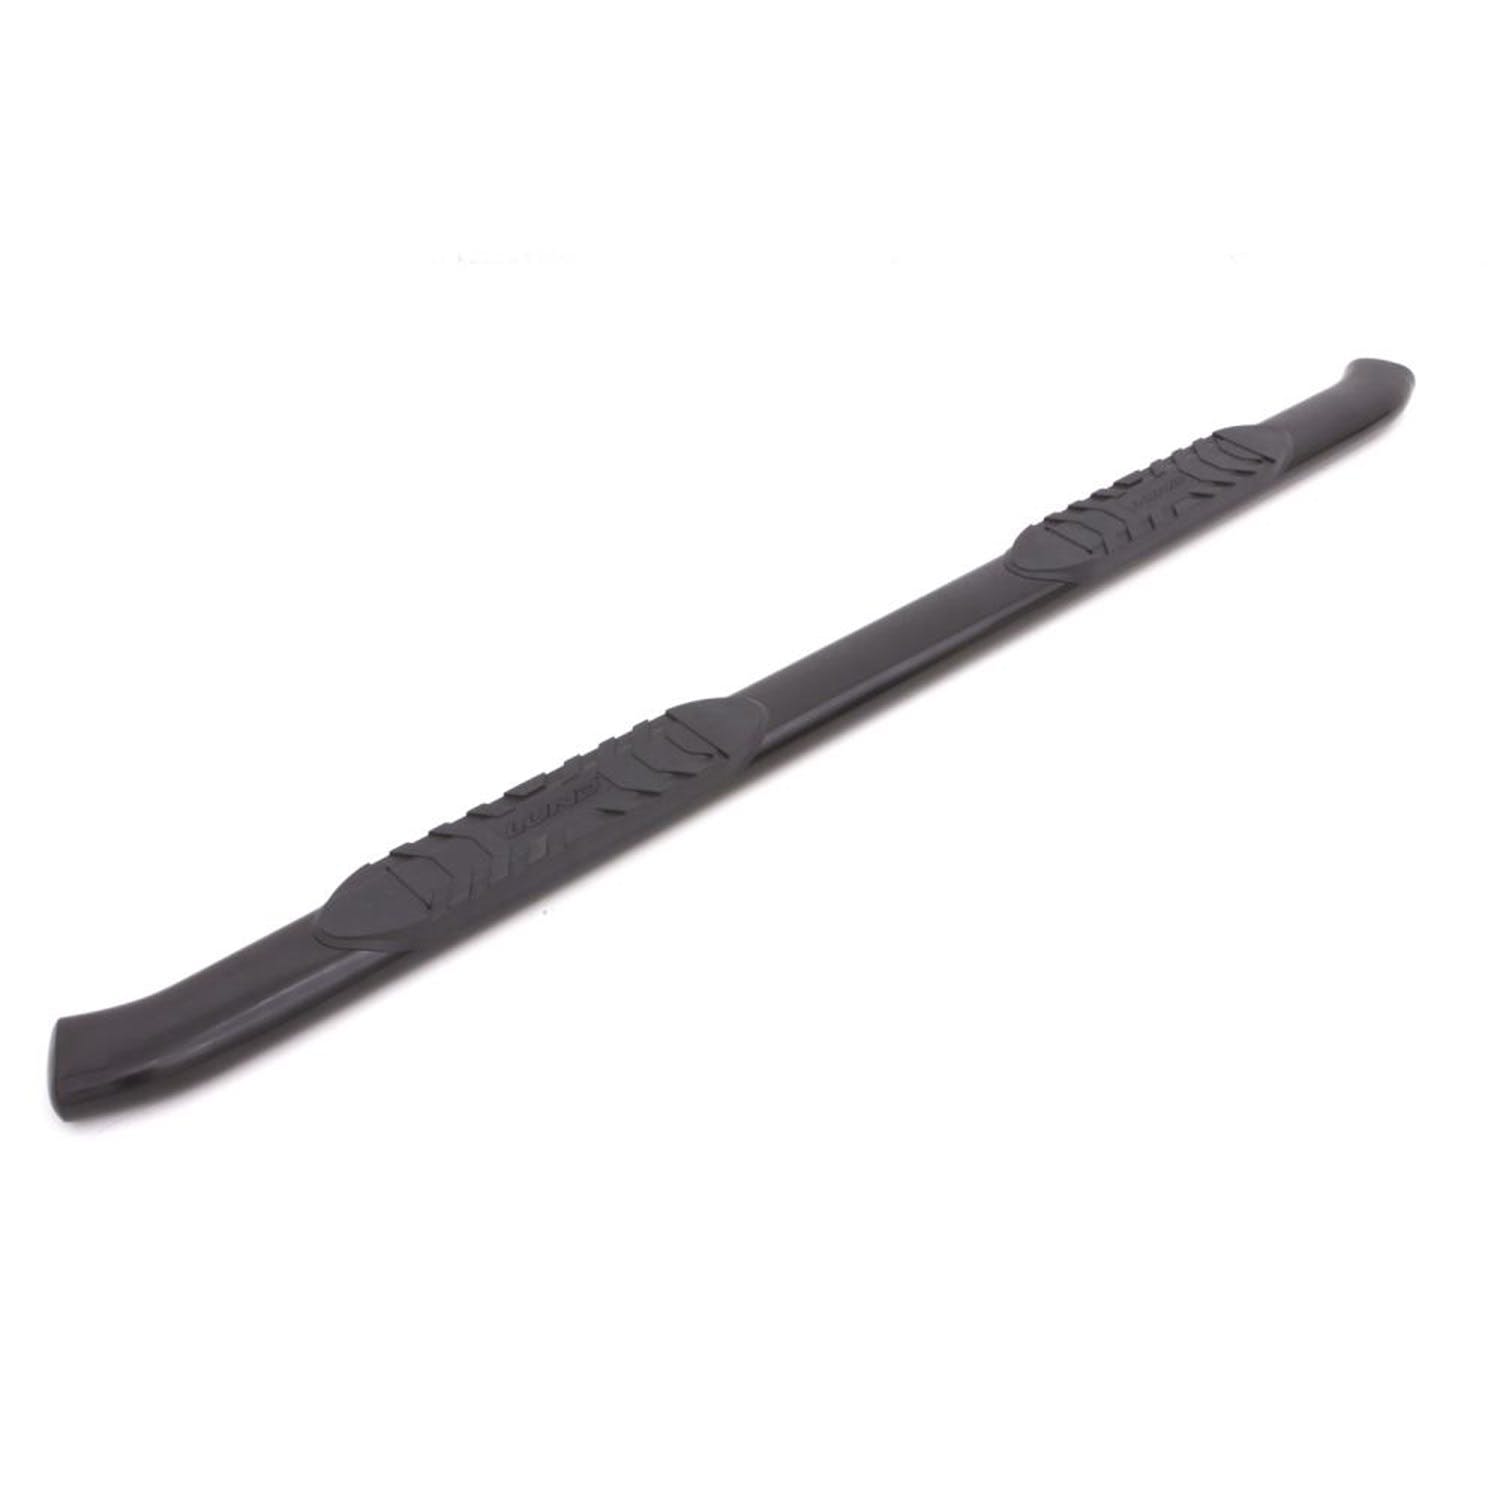 LUND 24276750 5 Inch Oval Curved Nerf Bar - Black LUND -5 inch CURVED OVAL BLACK SS